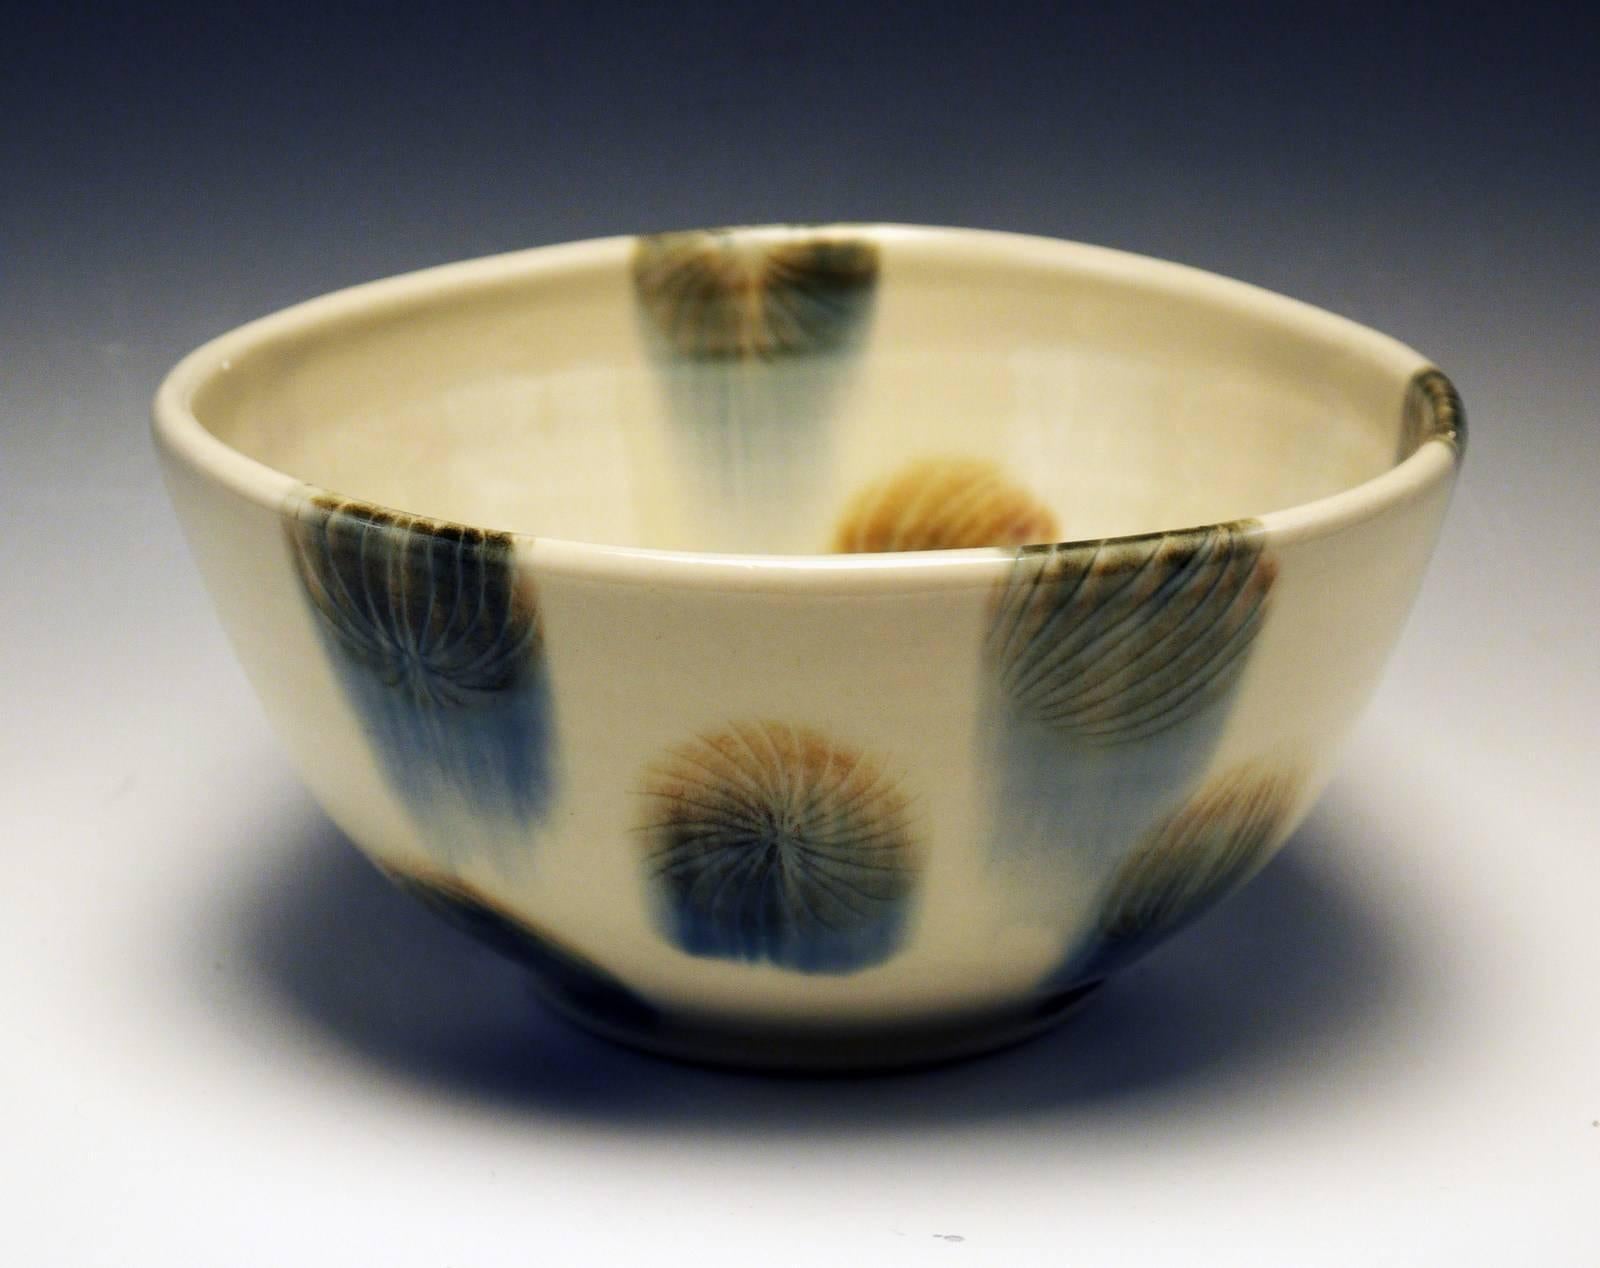 Bowl - Contemporary Art by Sean O'Connell